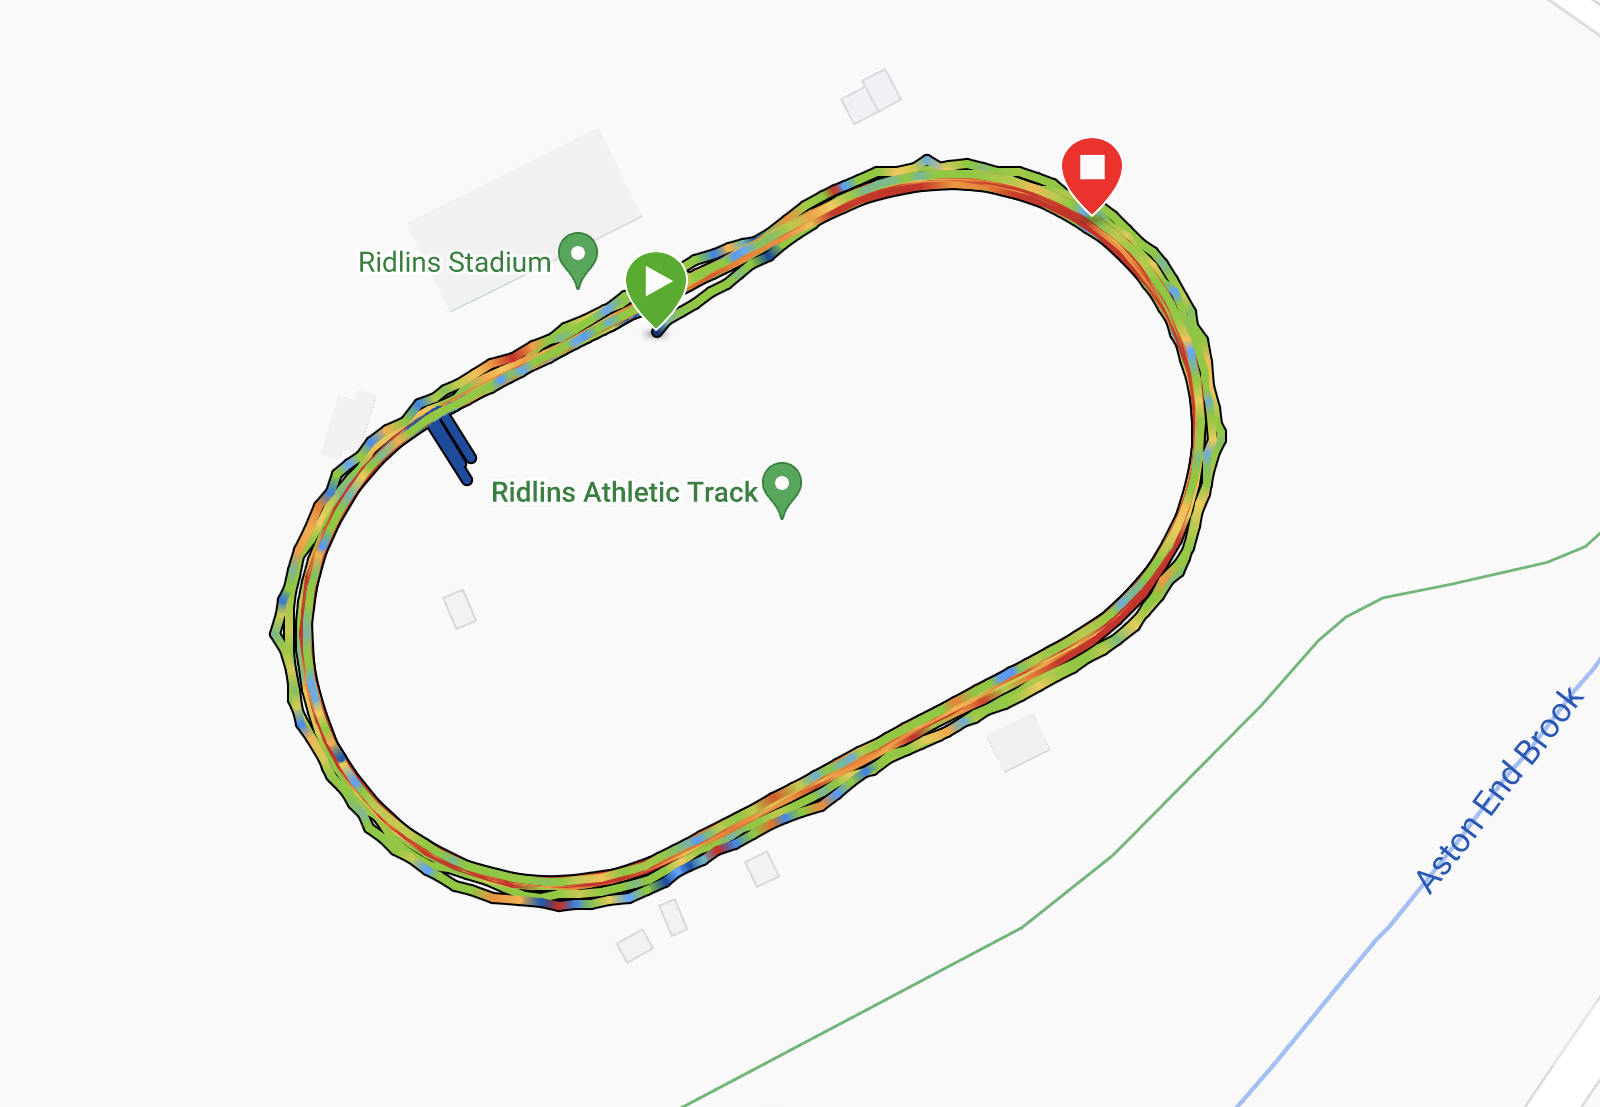 A map showing the gps trace of the running track